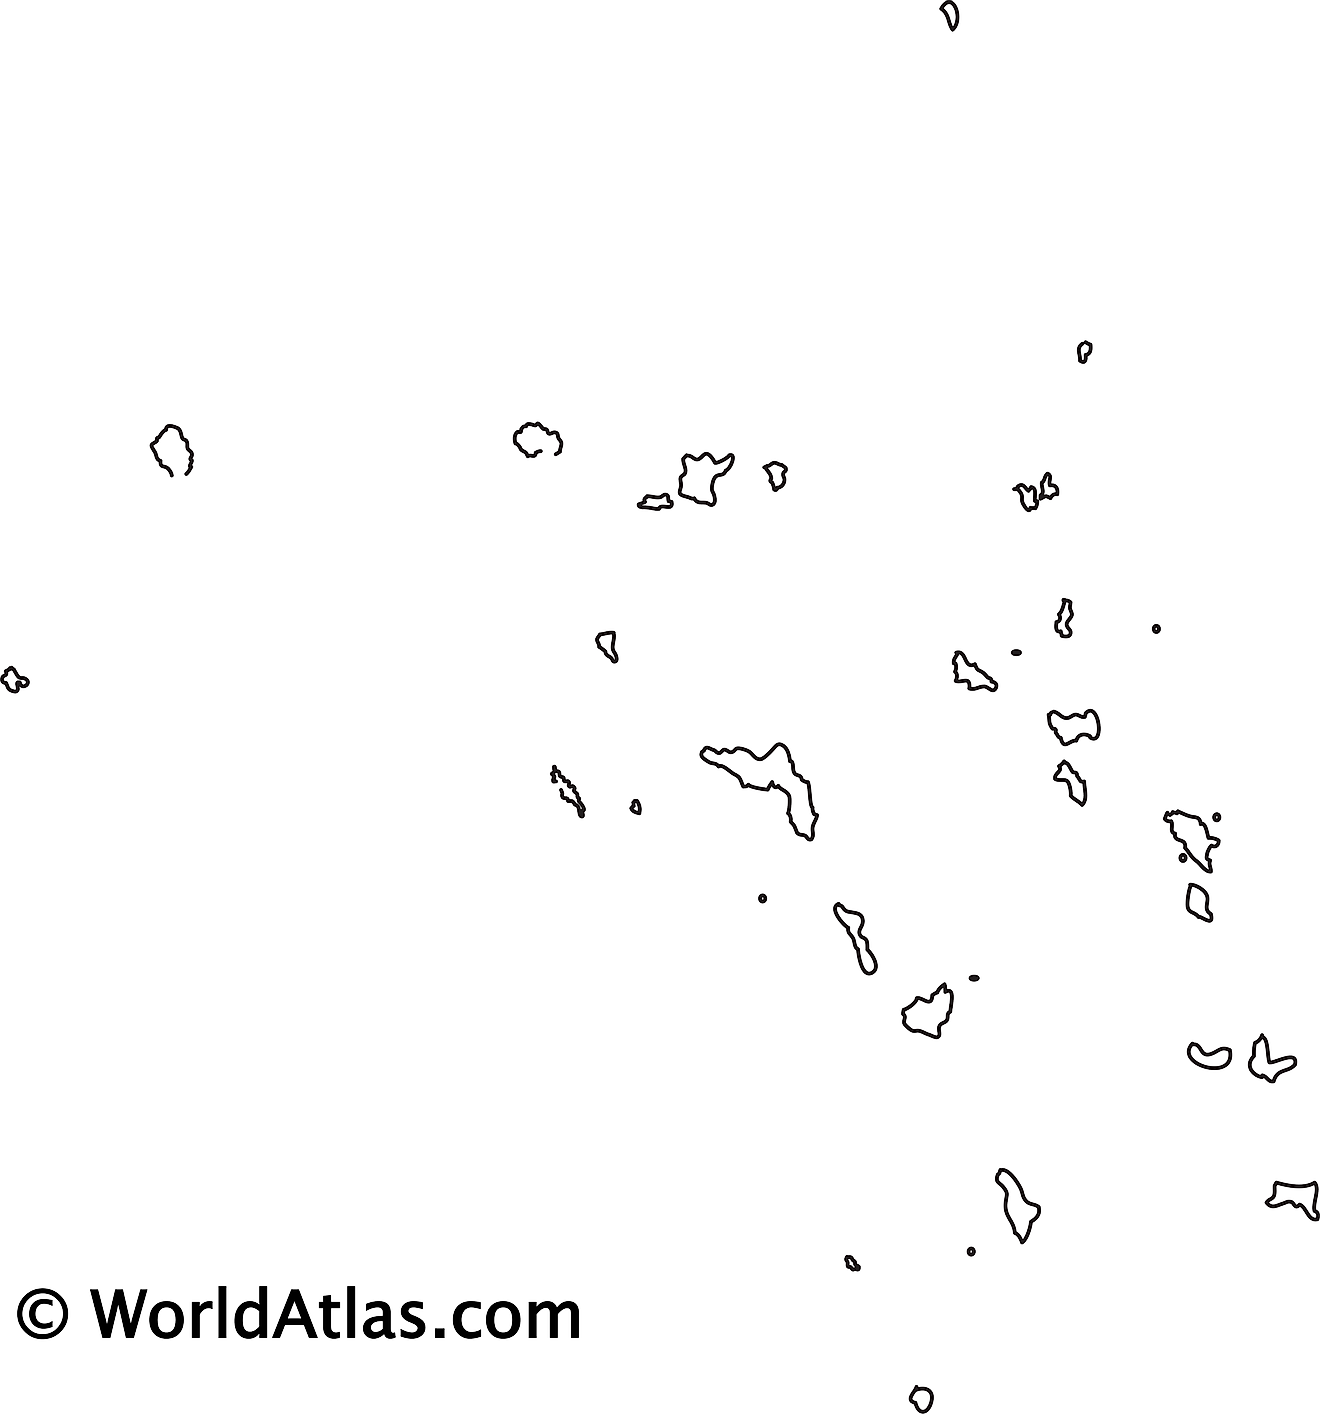 Blank Outline Map of Marshall Islands